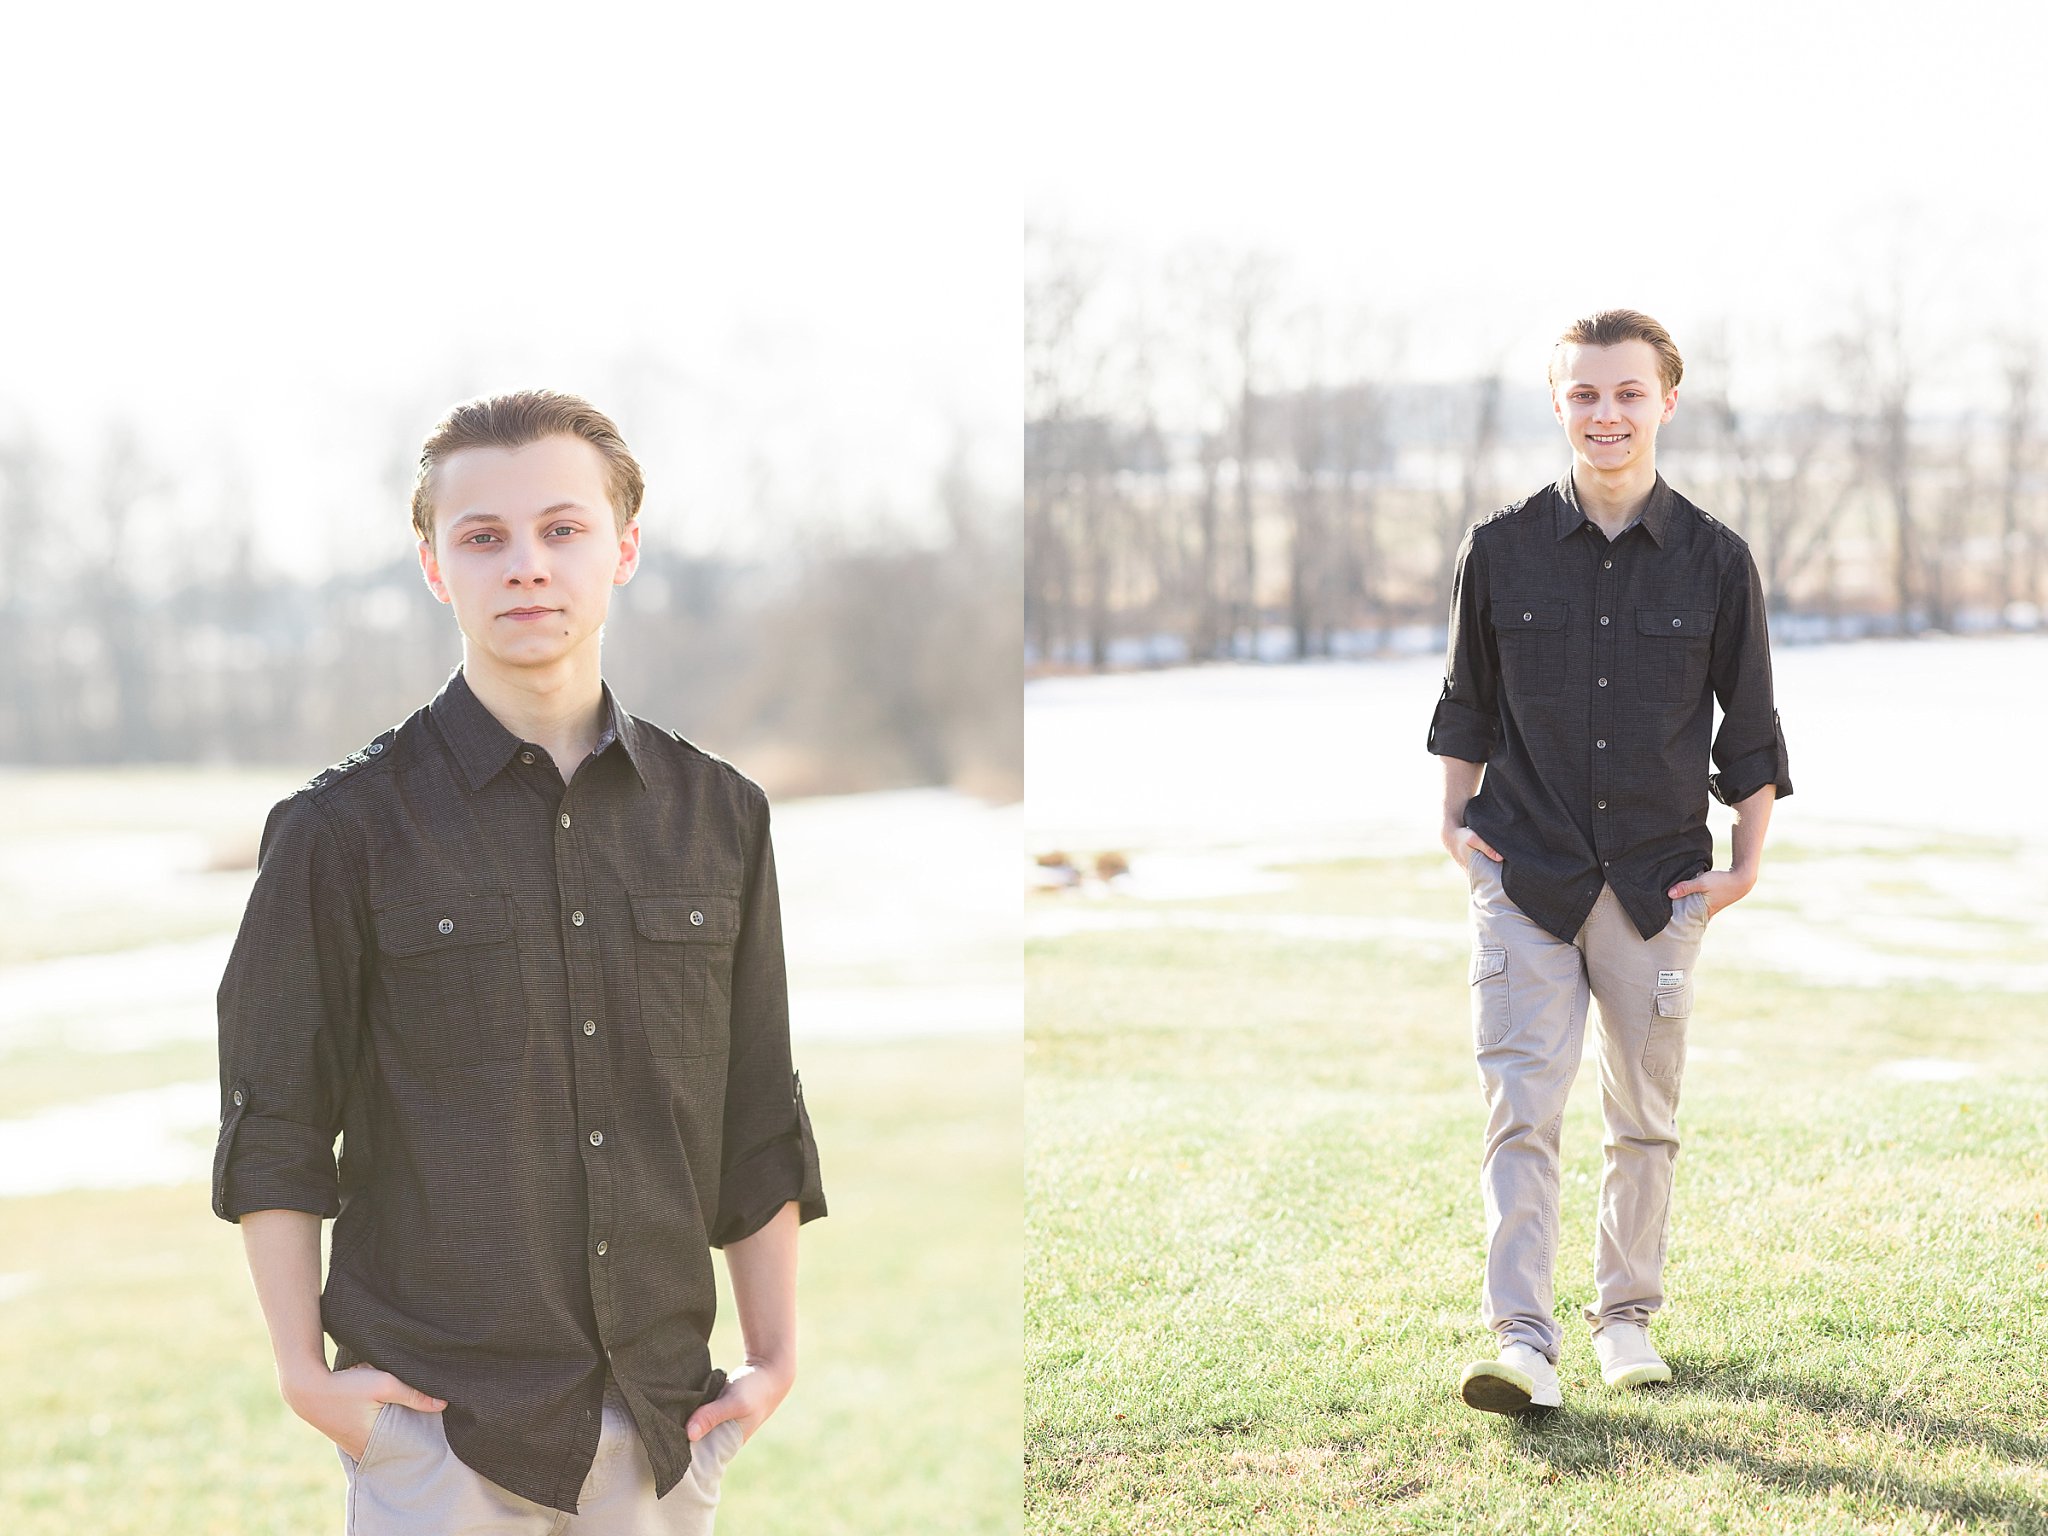 Winter Senior Session photos by Simply Seeking Photography